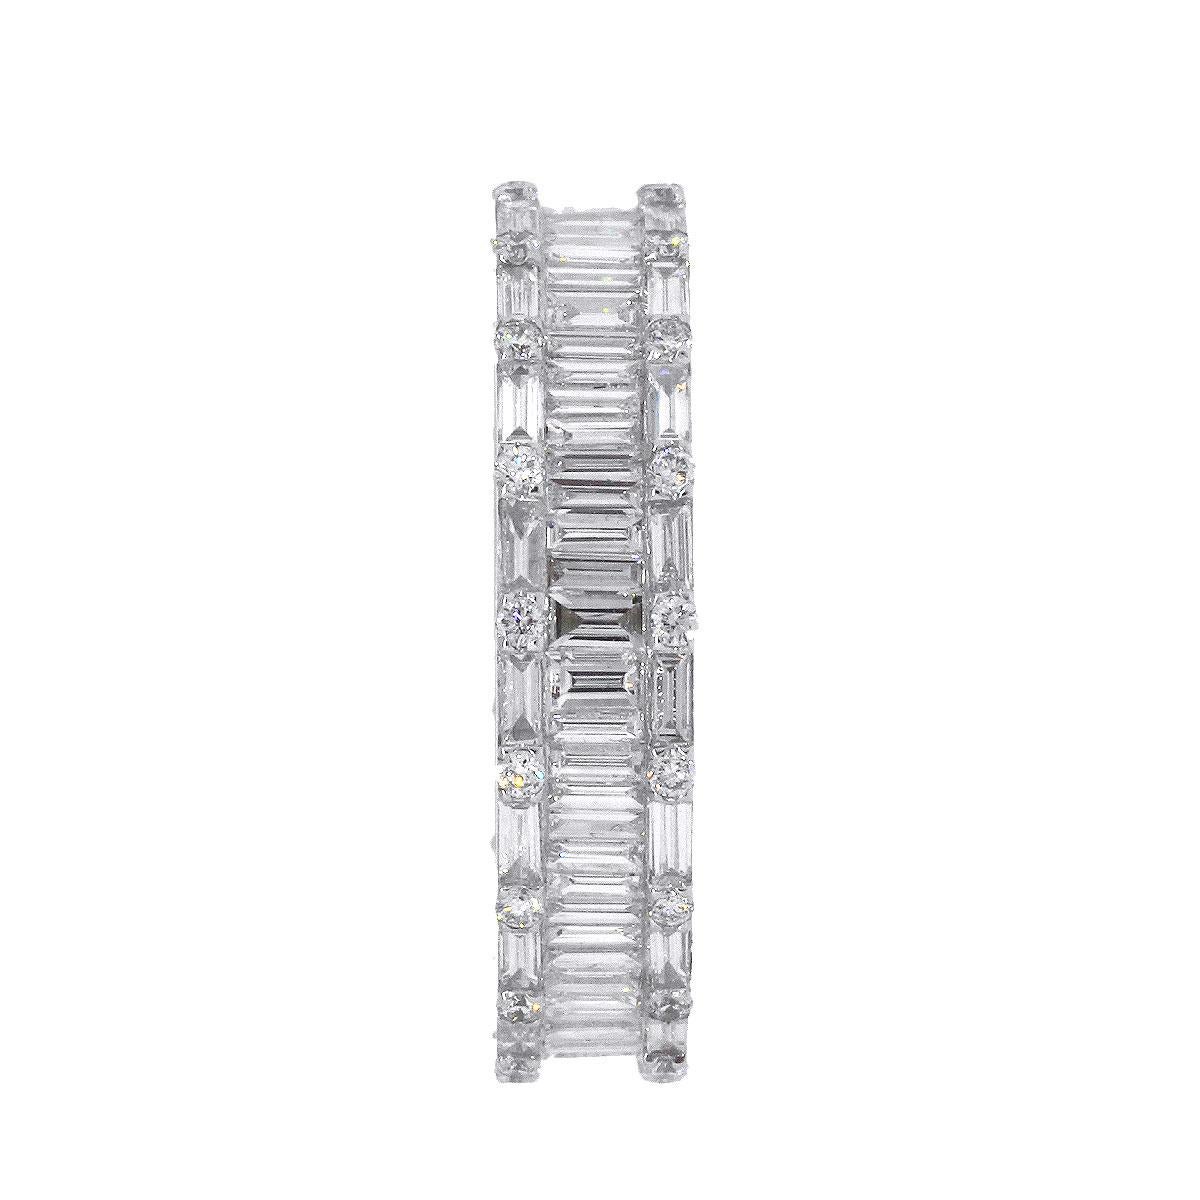 Material: 18k white gold
Round Diamond Details: Approximately 0.29ctw of Round cut diamonds. Diamonds are F/G in color and VS in clarity.
Baguette Diamond Details: Approximately 1.82ctw of Baguette cut diamonds. Diamonds are F/G in color and VS in